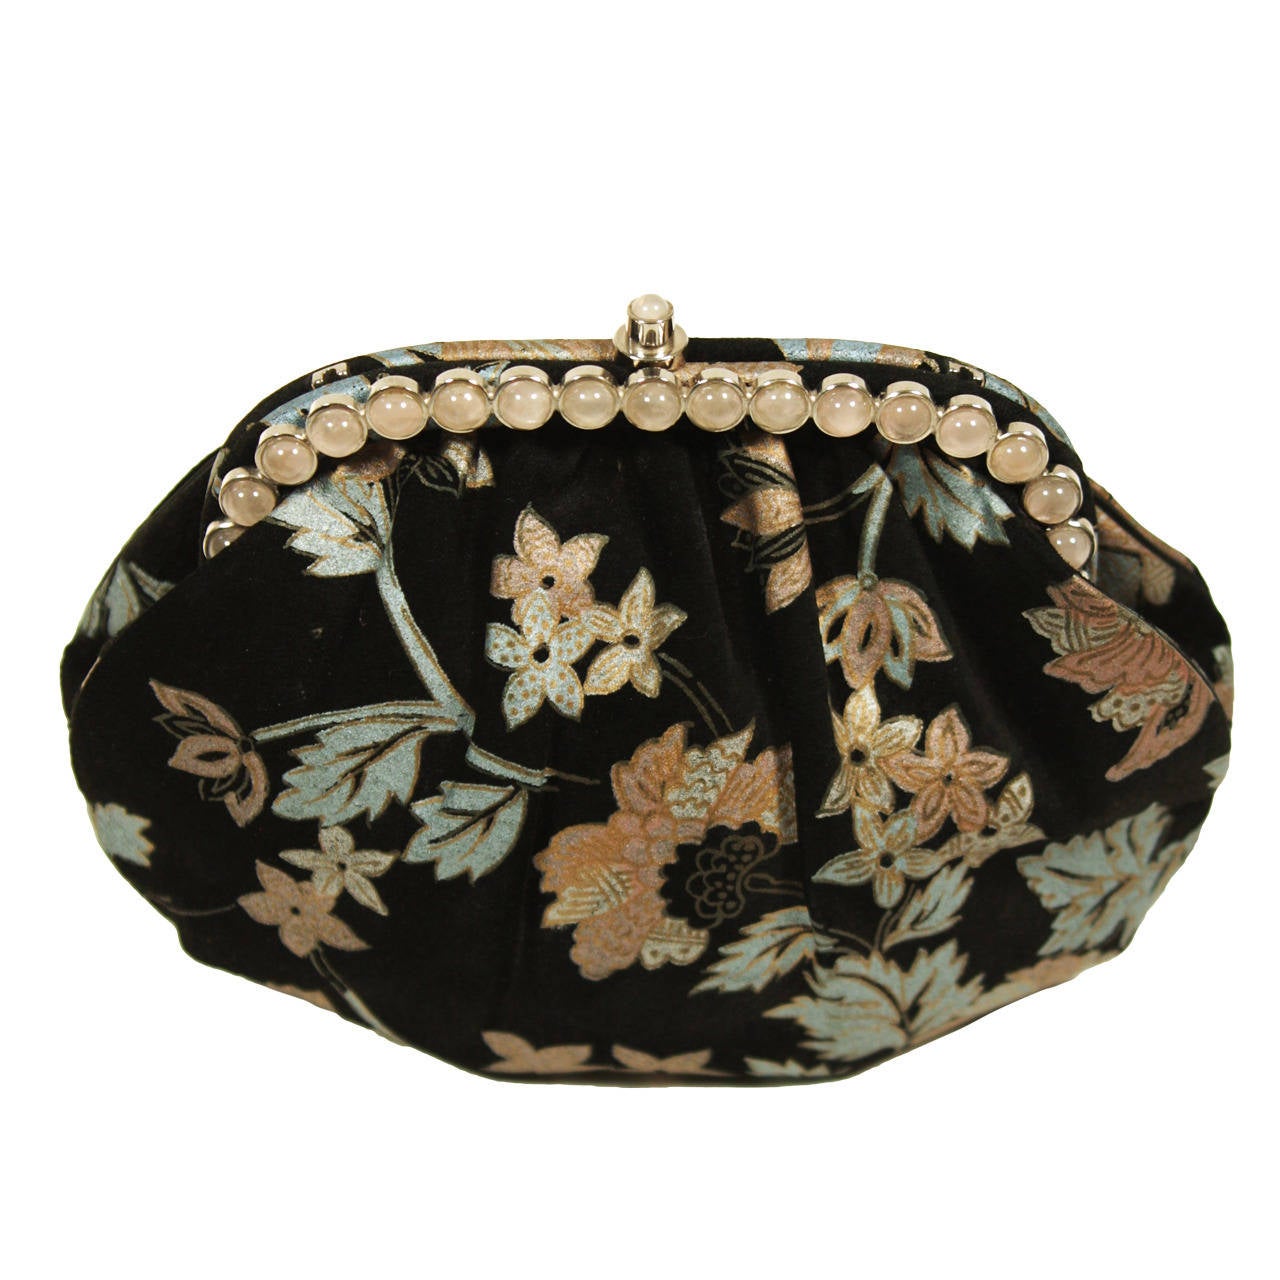 Judith Leiber Printed Suede Purse with Stone Accents